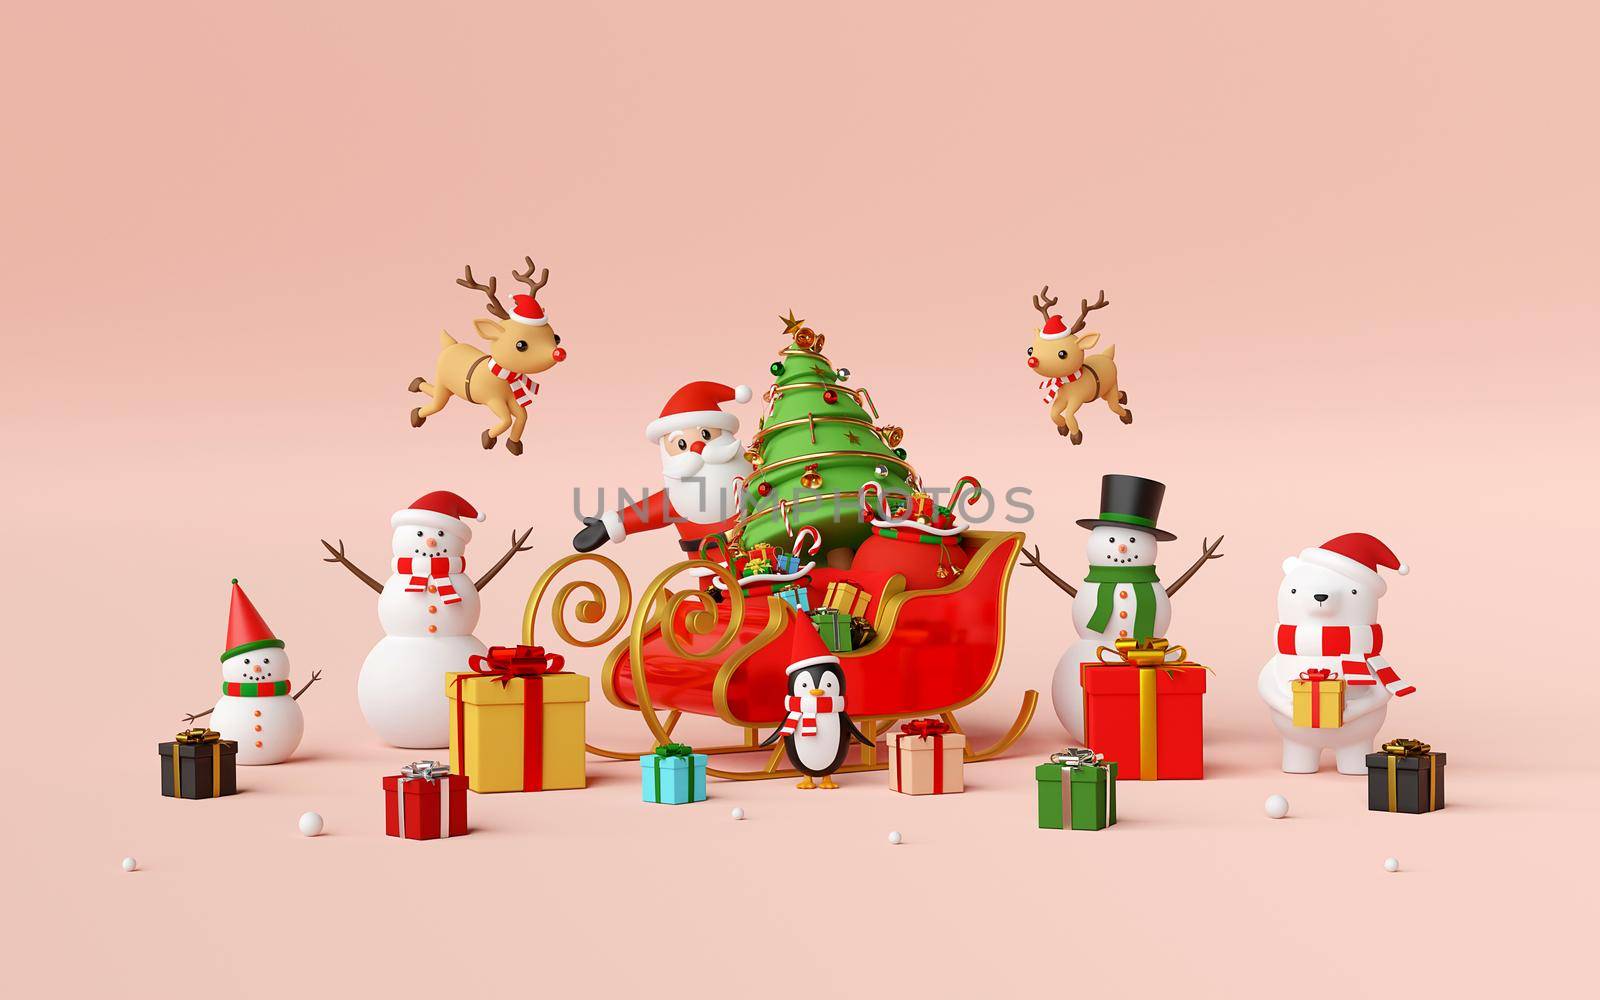 Merry Christmas and Happy New Year, Scene of Christmas celebration with Santa Claus and friends, 3d rendering by nutzchotwarut